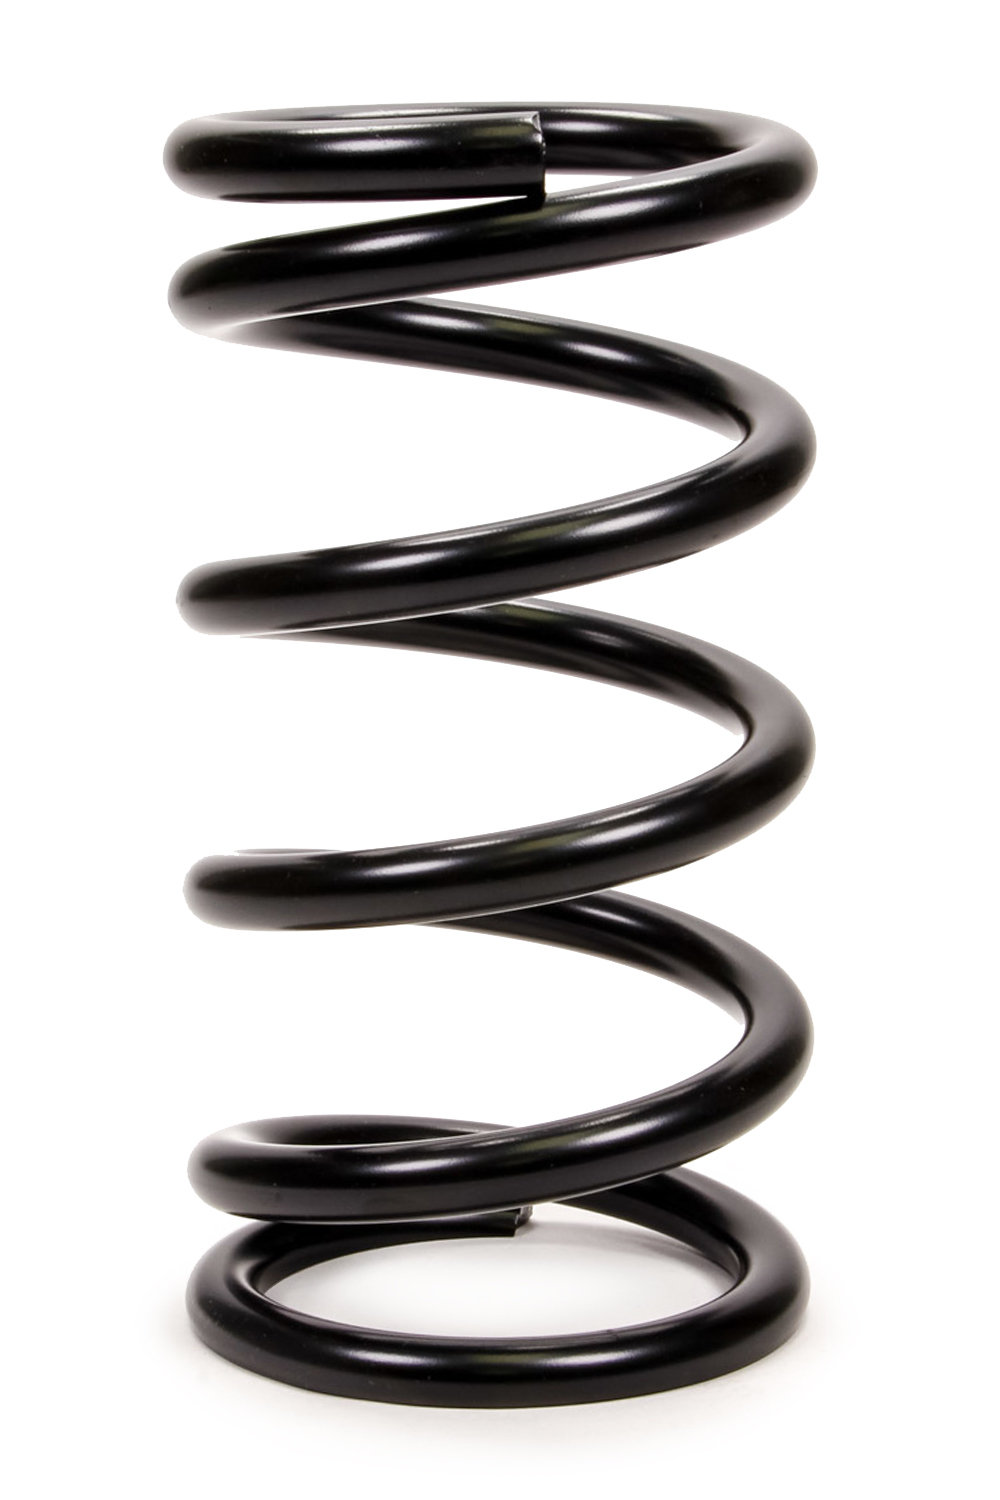 Swift Springs 950-550-550 Coil Spring, Conventional, 5.5 in OD, 9.500 in Length, 550 lb/in Spring Rate, Front, Steel, Black Powder Coat, Each